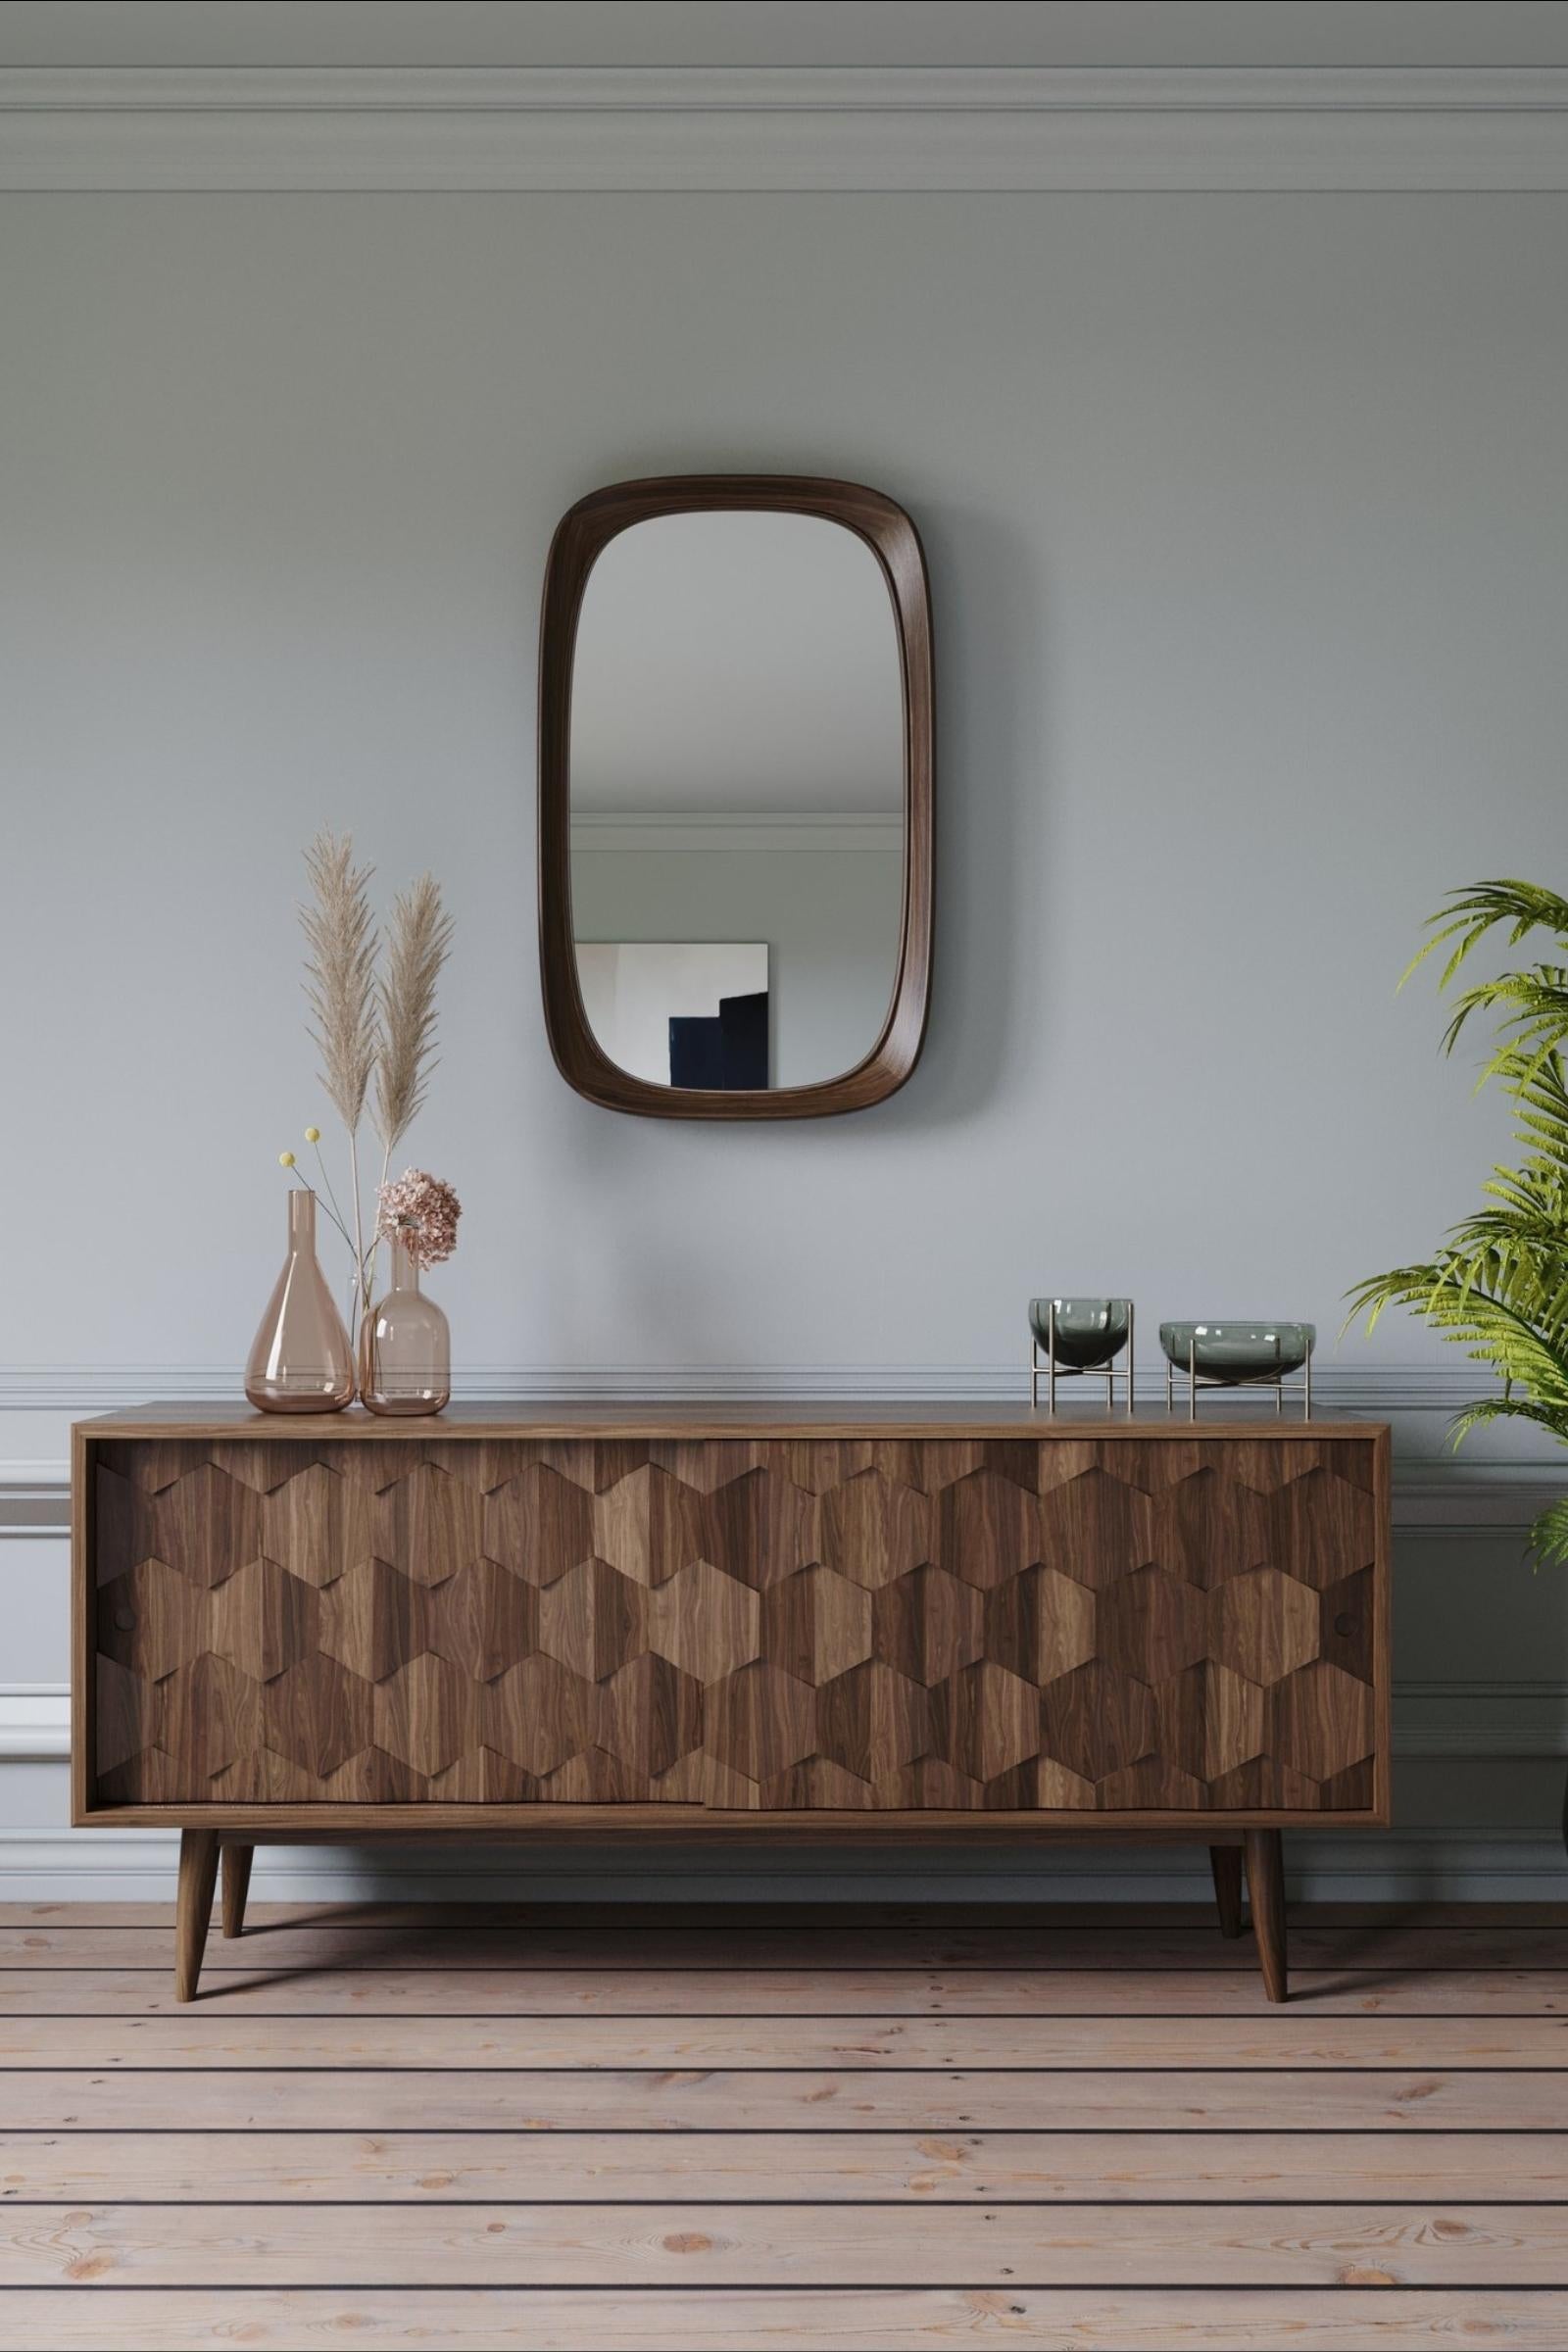 Crafted from high-quality and certified materials, his gorgeous sculptural solid Walnut sideboard emphasizes the traditional joinery techniques.

With the structure and interiors in 100% solid wood, this is a rectangular sideboard with a unique